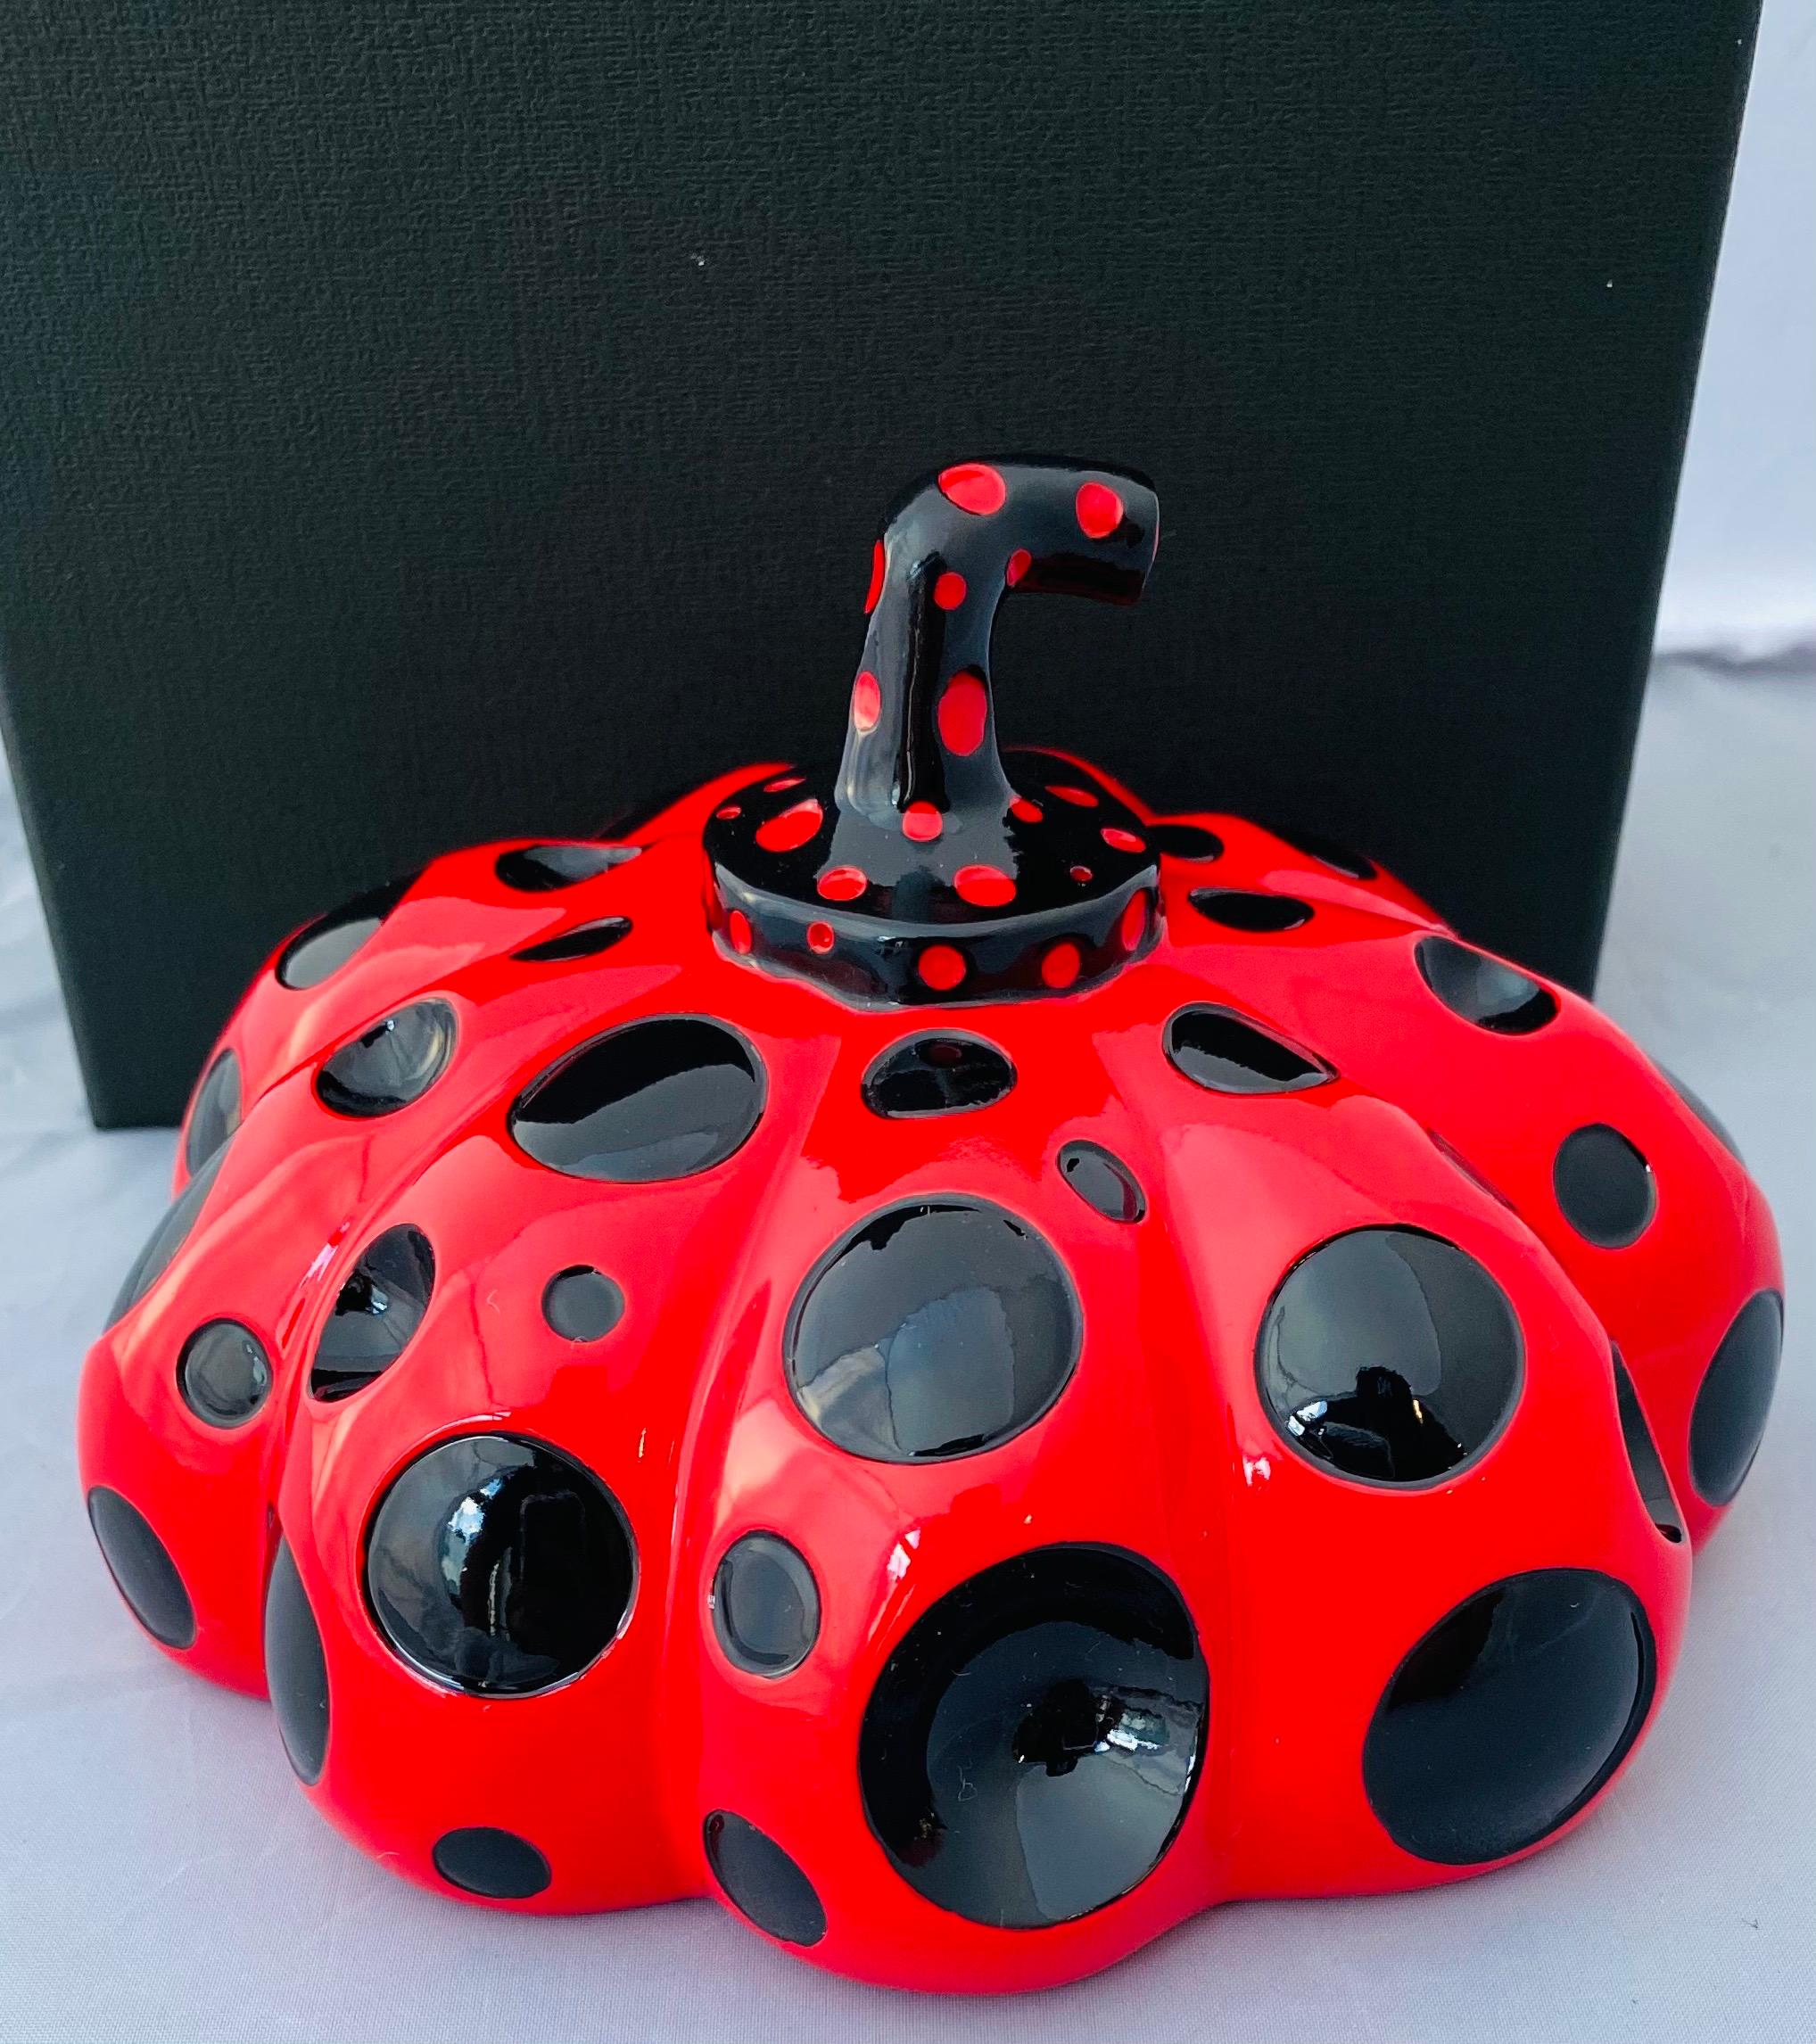 Yayoi Kusama Red & Black Pumpkin 2019:
An iconic, vibrantly colored pop art piece - this rare, sought-after red Kusama pumpkin sculpture features the universal polka dot patterns and bold colors for which the artist is perhaps best known. Kusama